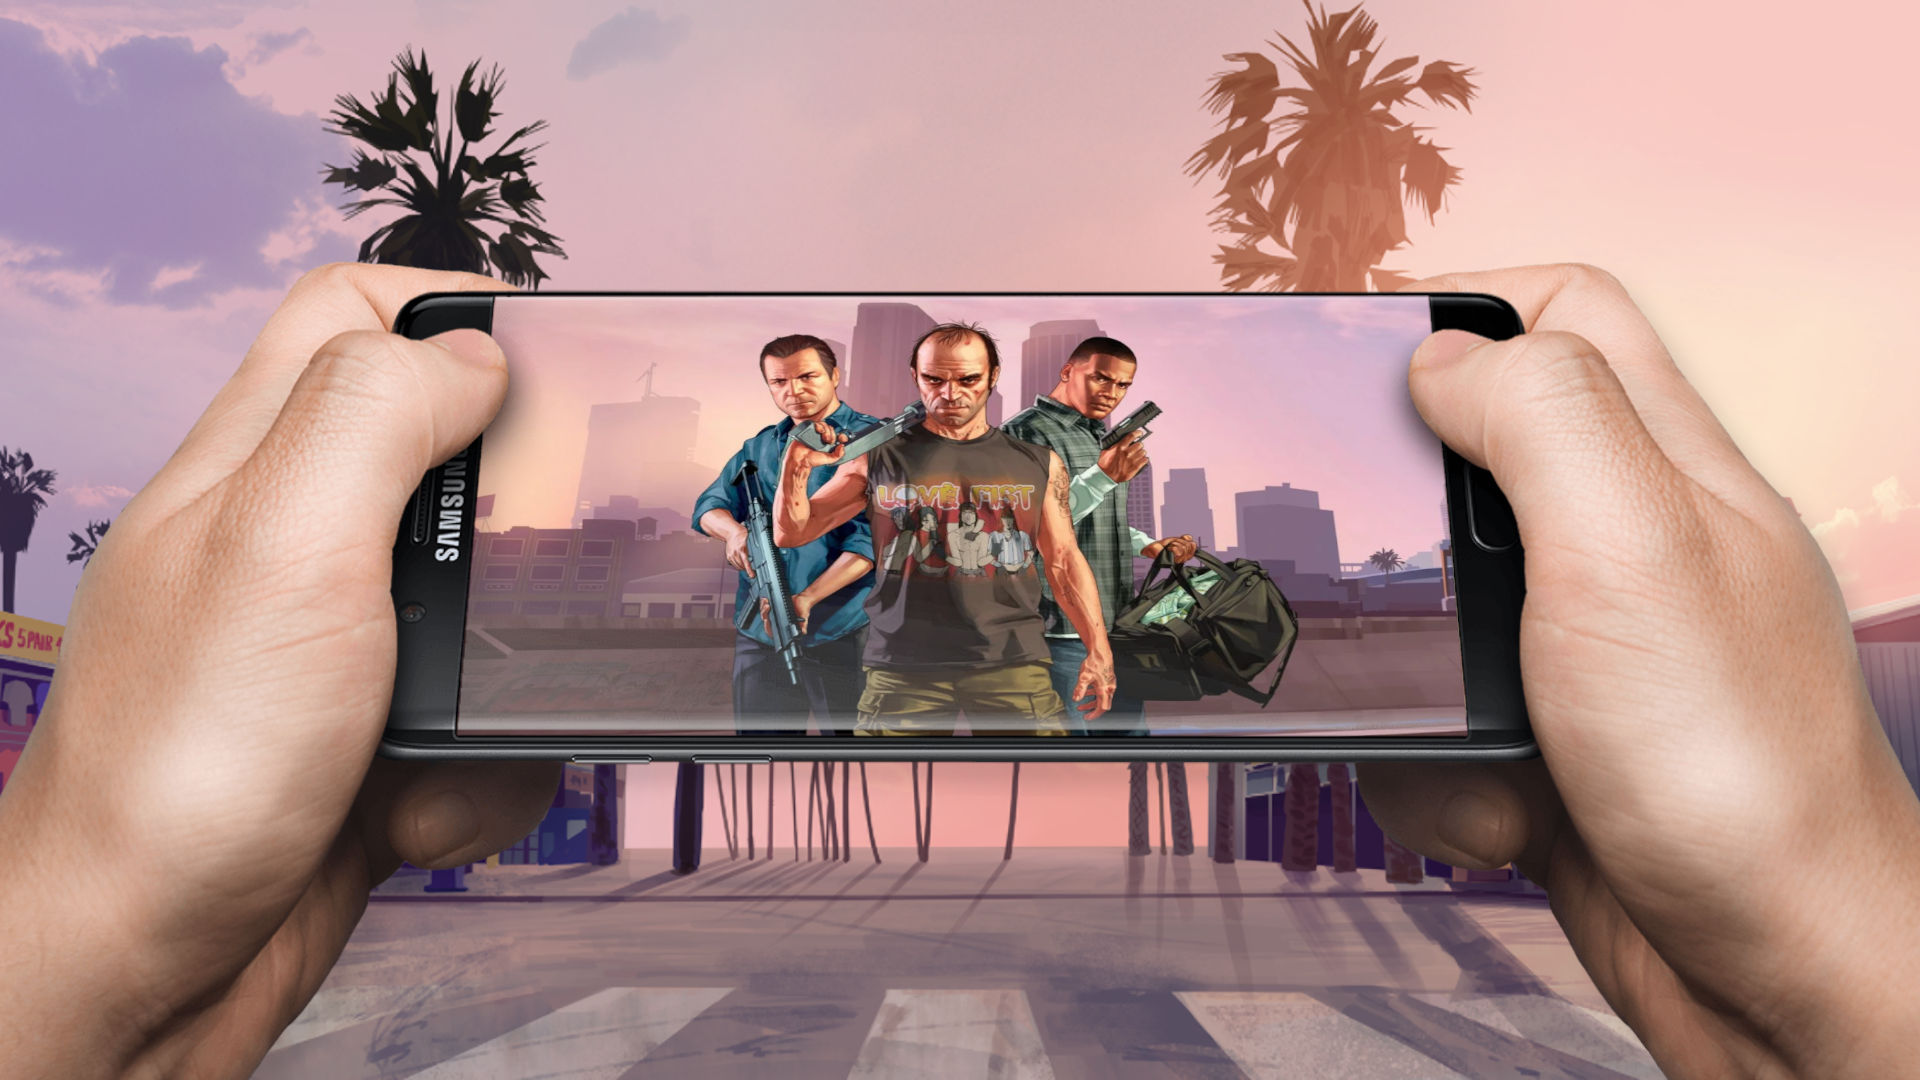 Warning: GTA 5 Android & GTA 5 Mobile, APK Downloads Are Scams